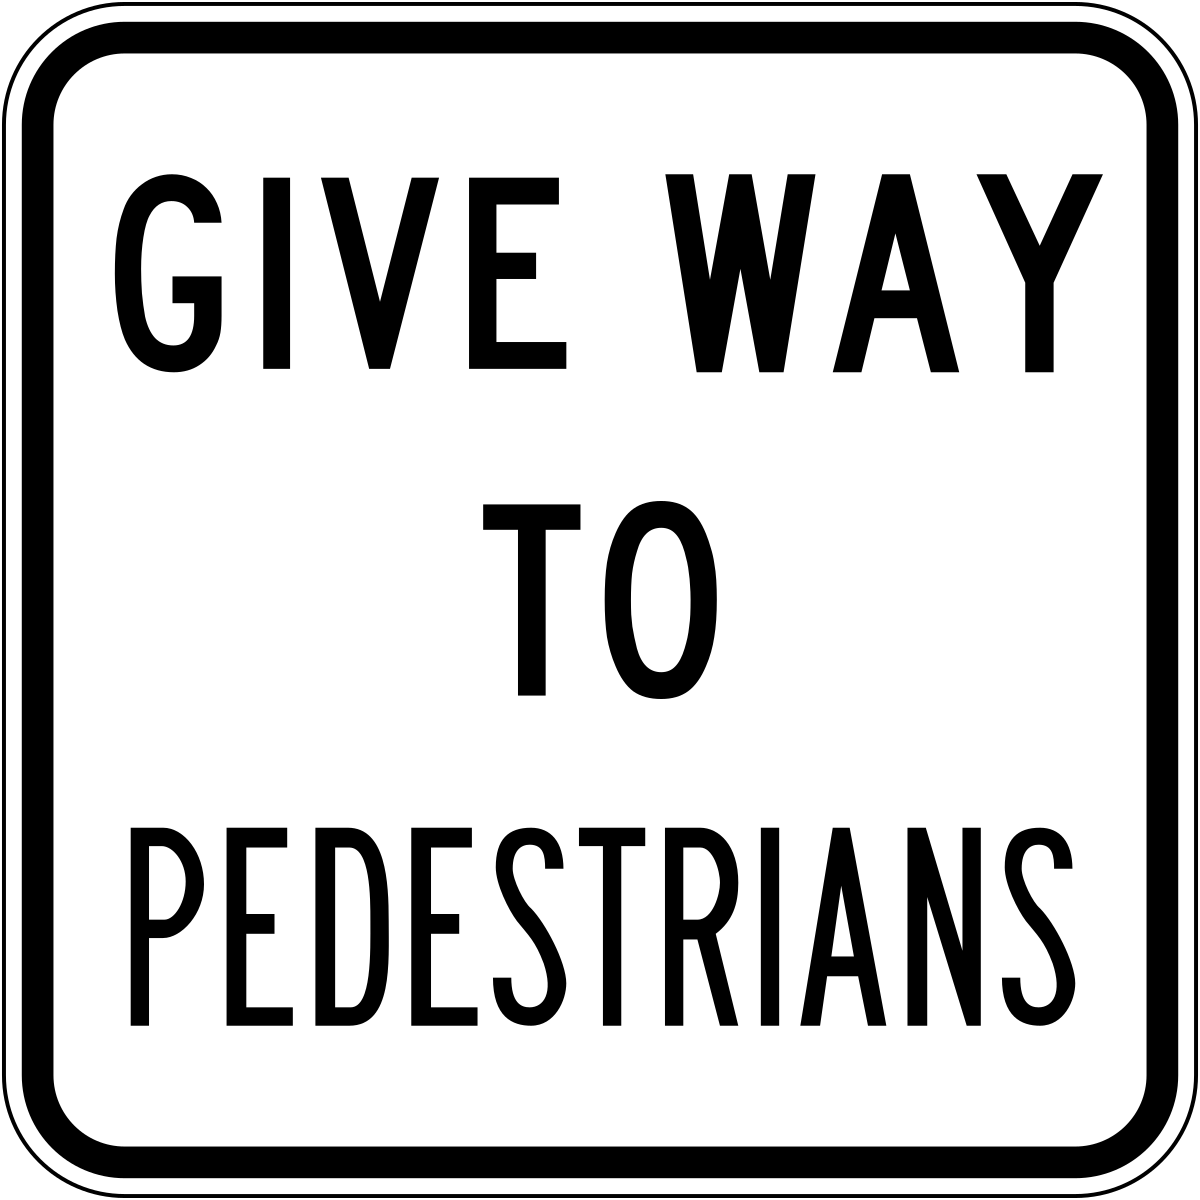 Way sign. Give way to pedestrians. Give way. Give way sign. Значки классов r2.